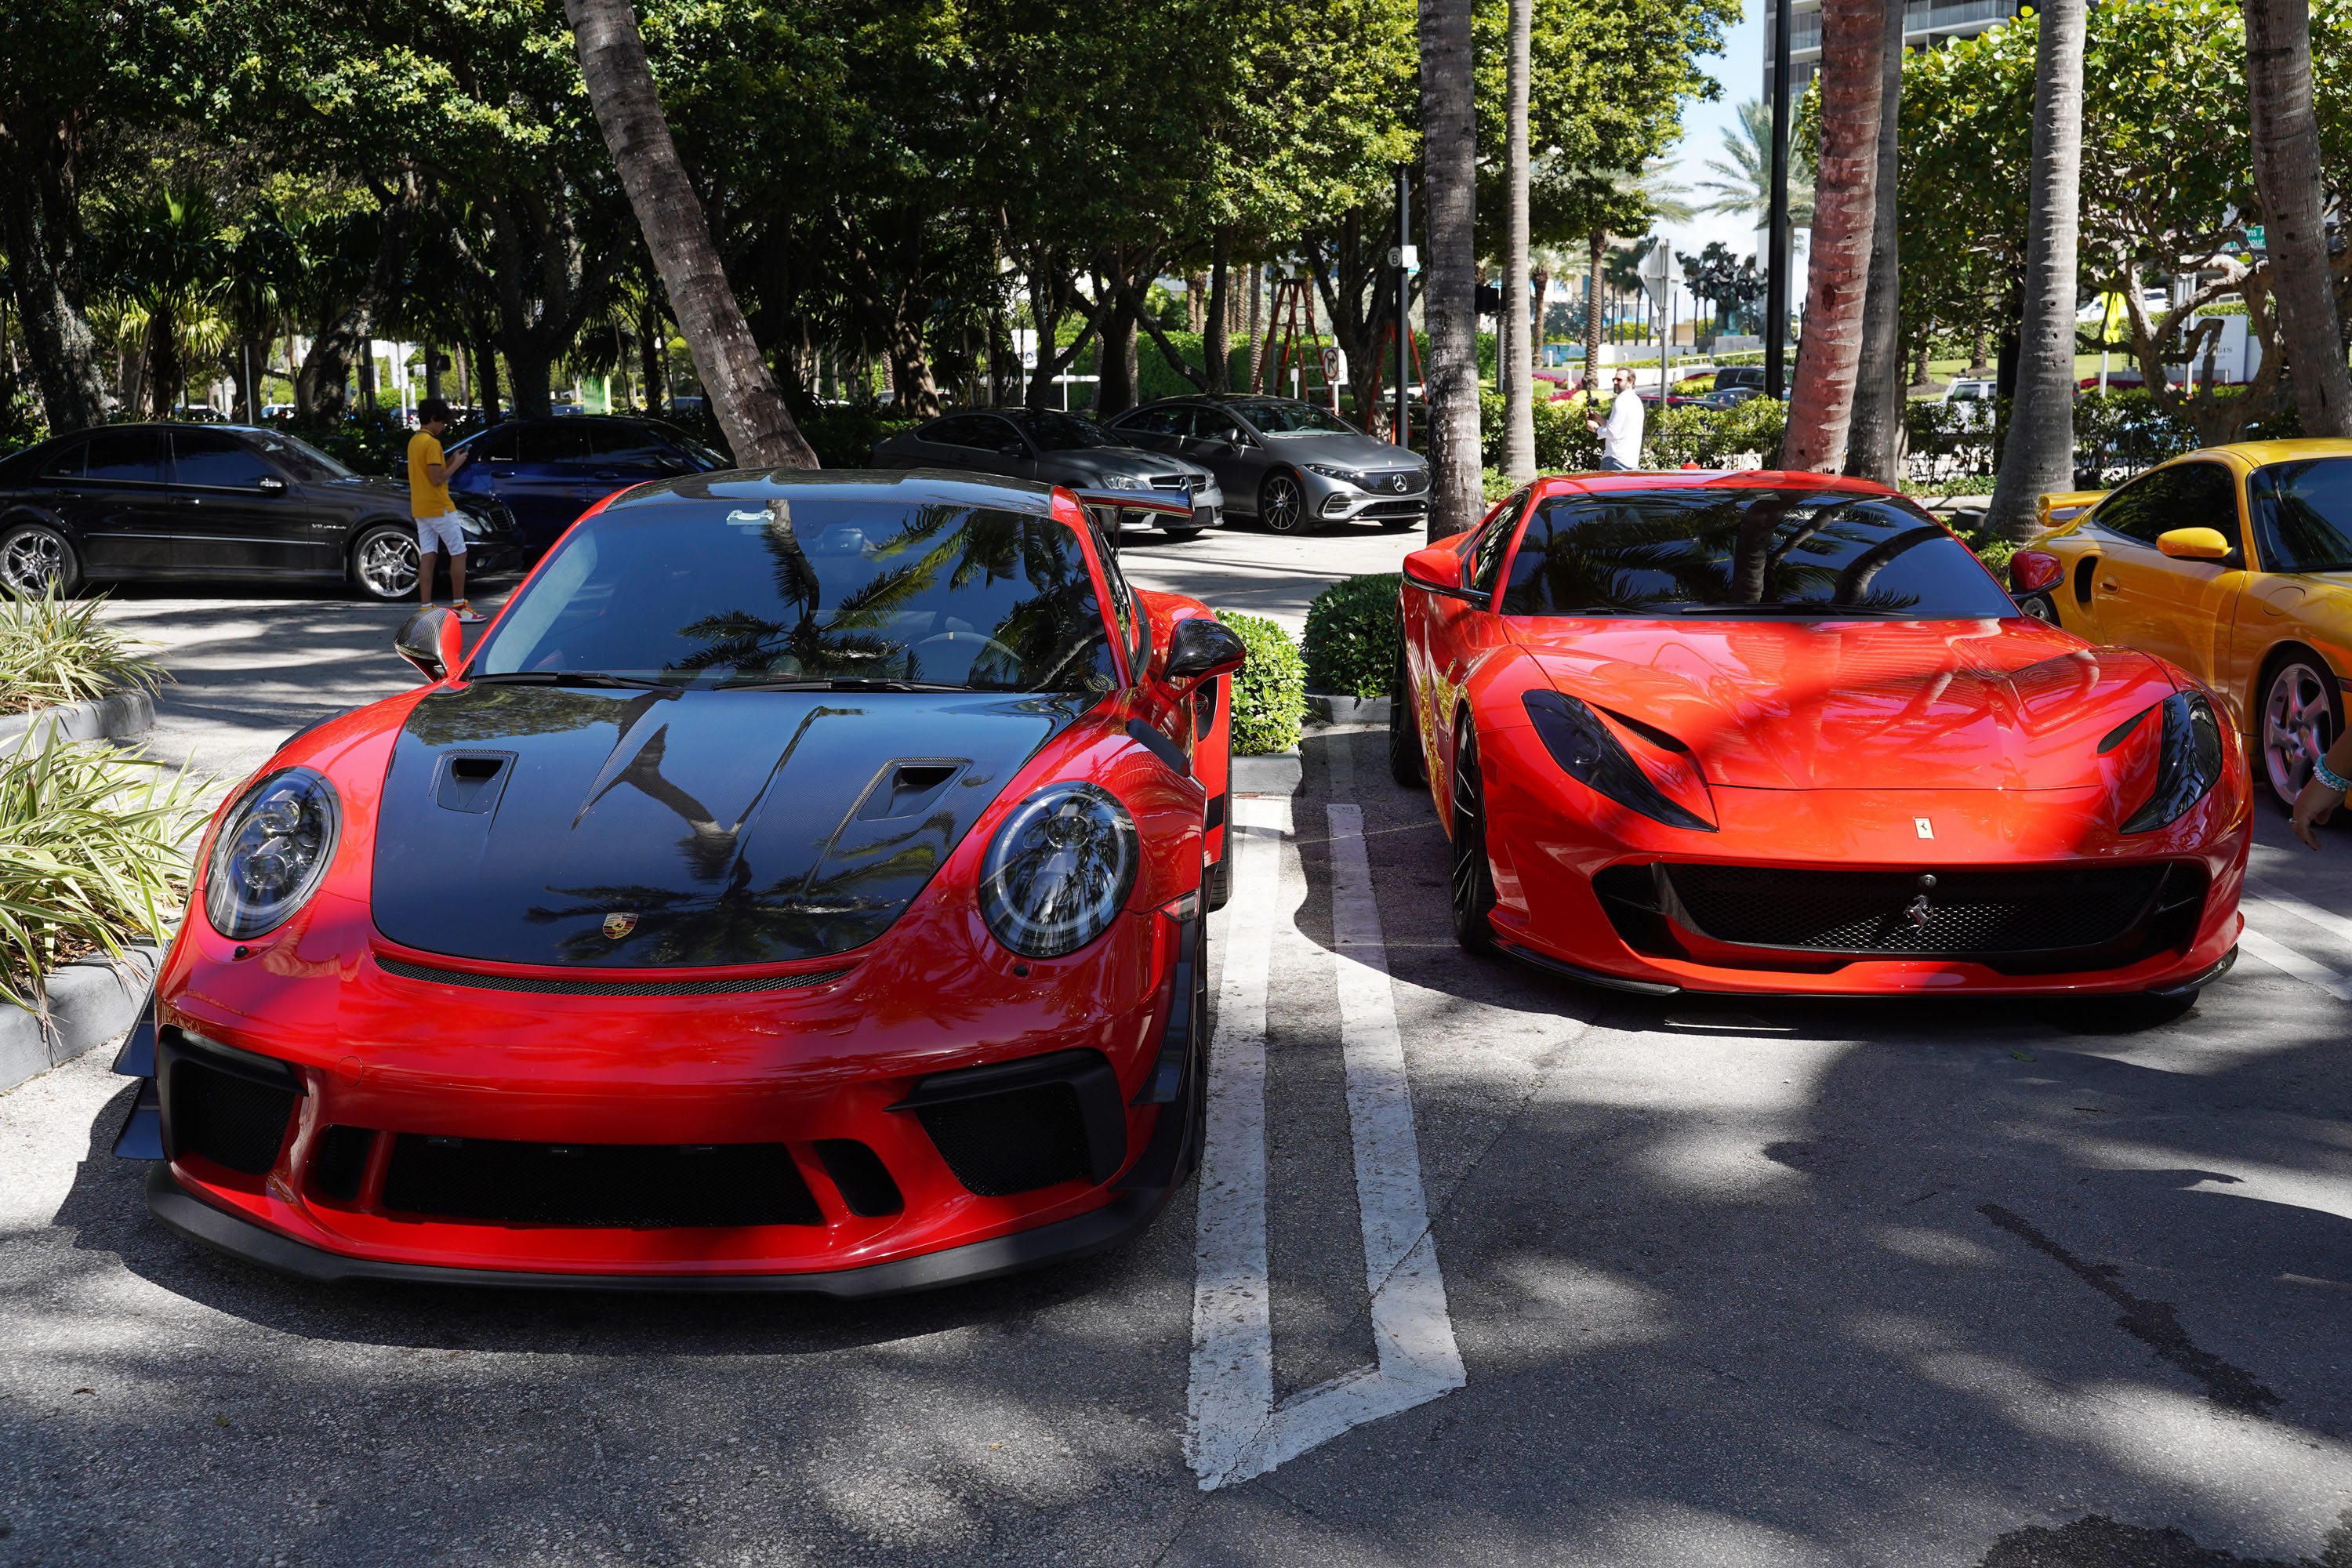 A variety of images showcasing the Collector’s Car Show hosted by Bal Harbour Shops during Bespoke Bal Harbour. Images include guests in attendance, rare and exotic cars showcased at the event, and watched from Richard Mille.